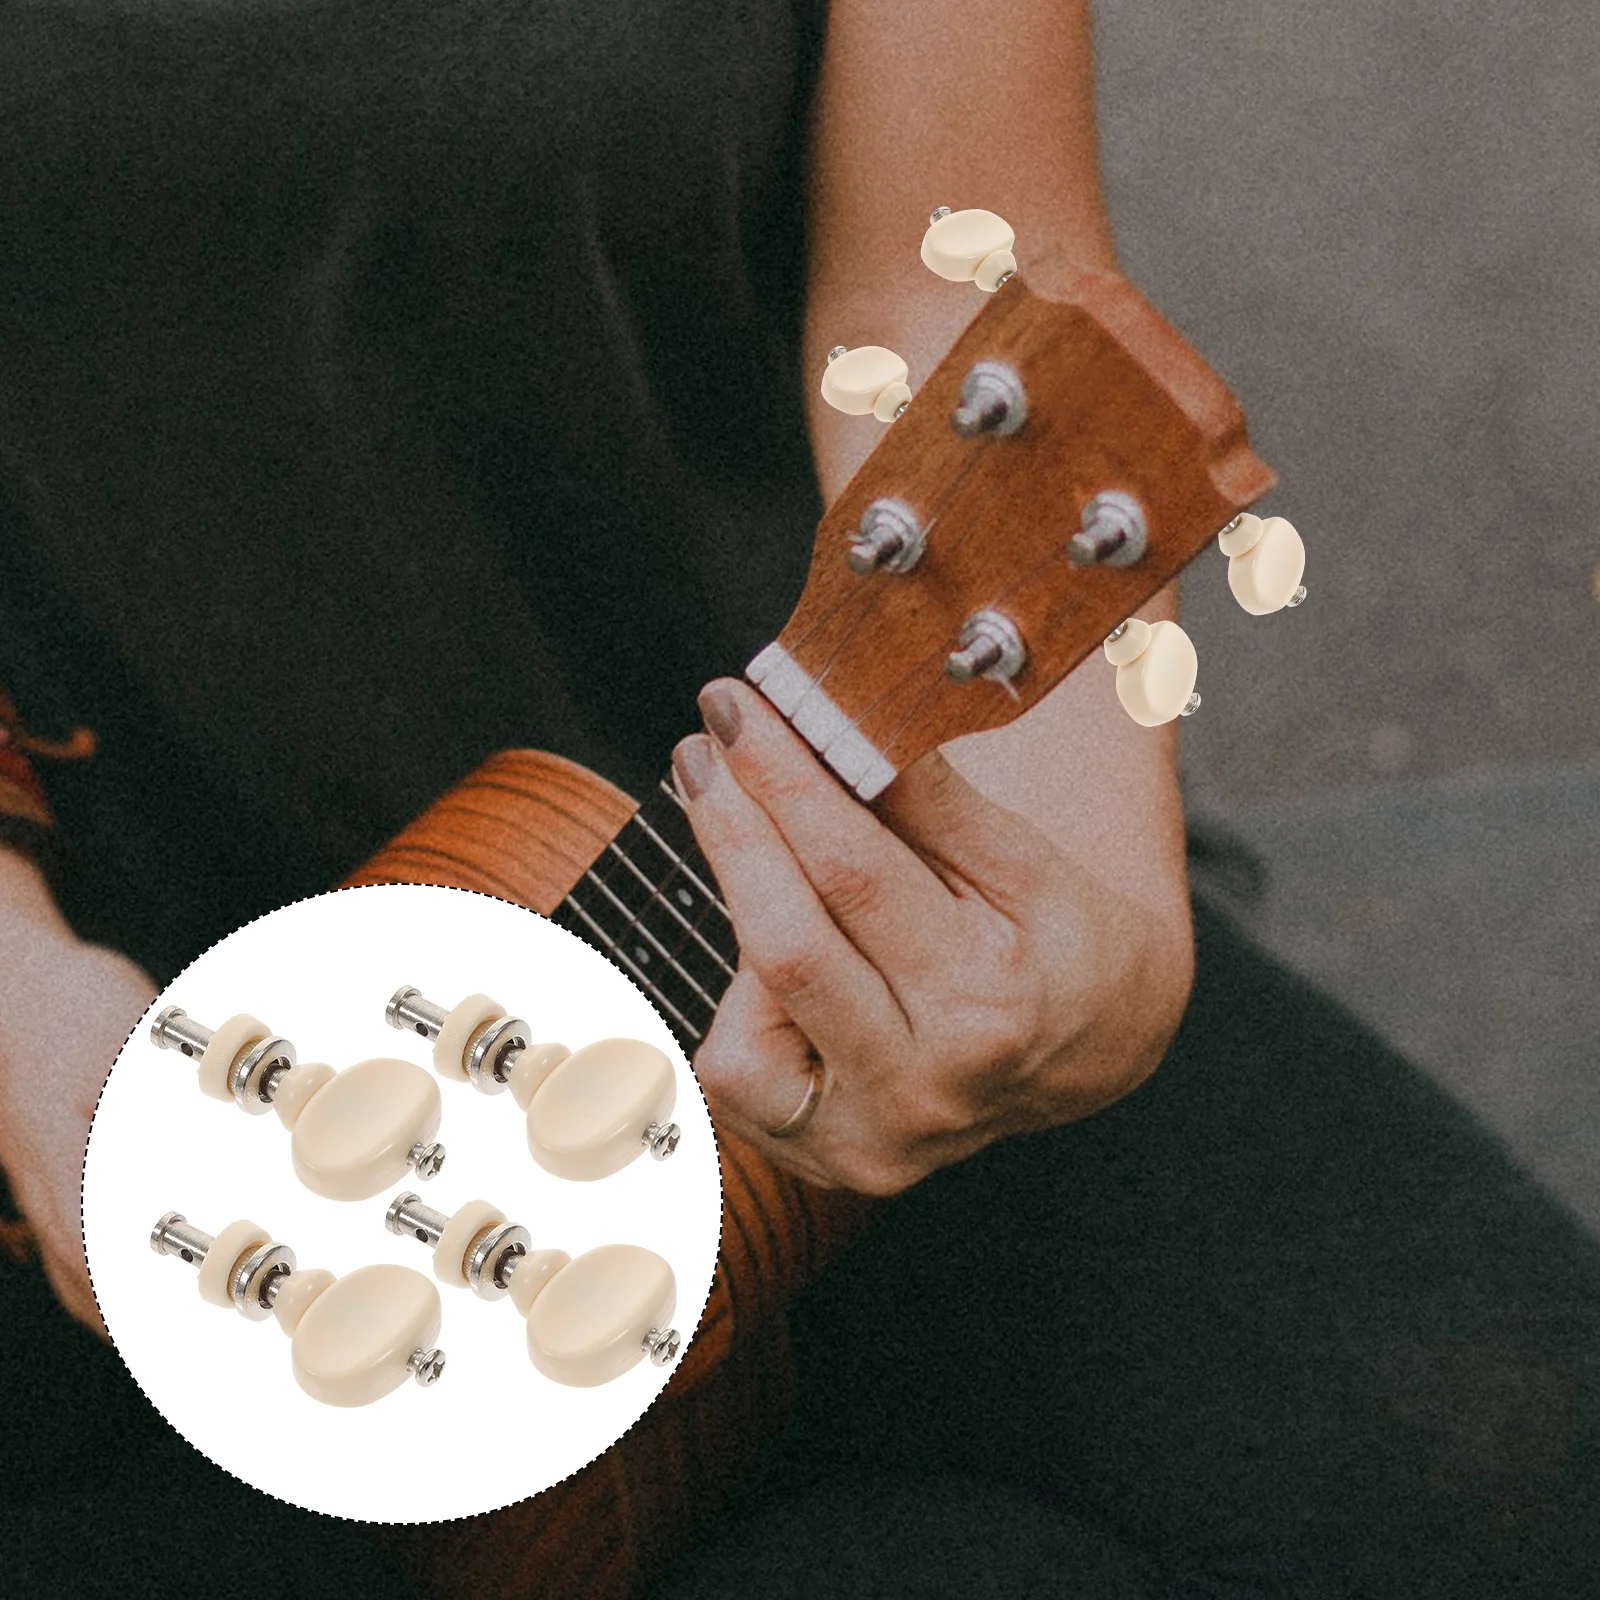 

Guitar Tuning Tuner Pegs Ukulele Machines Key String Classical Tuners Locking Peg Electric Keys Machine Acoustic Button